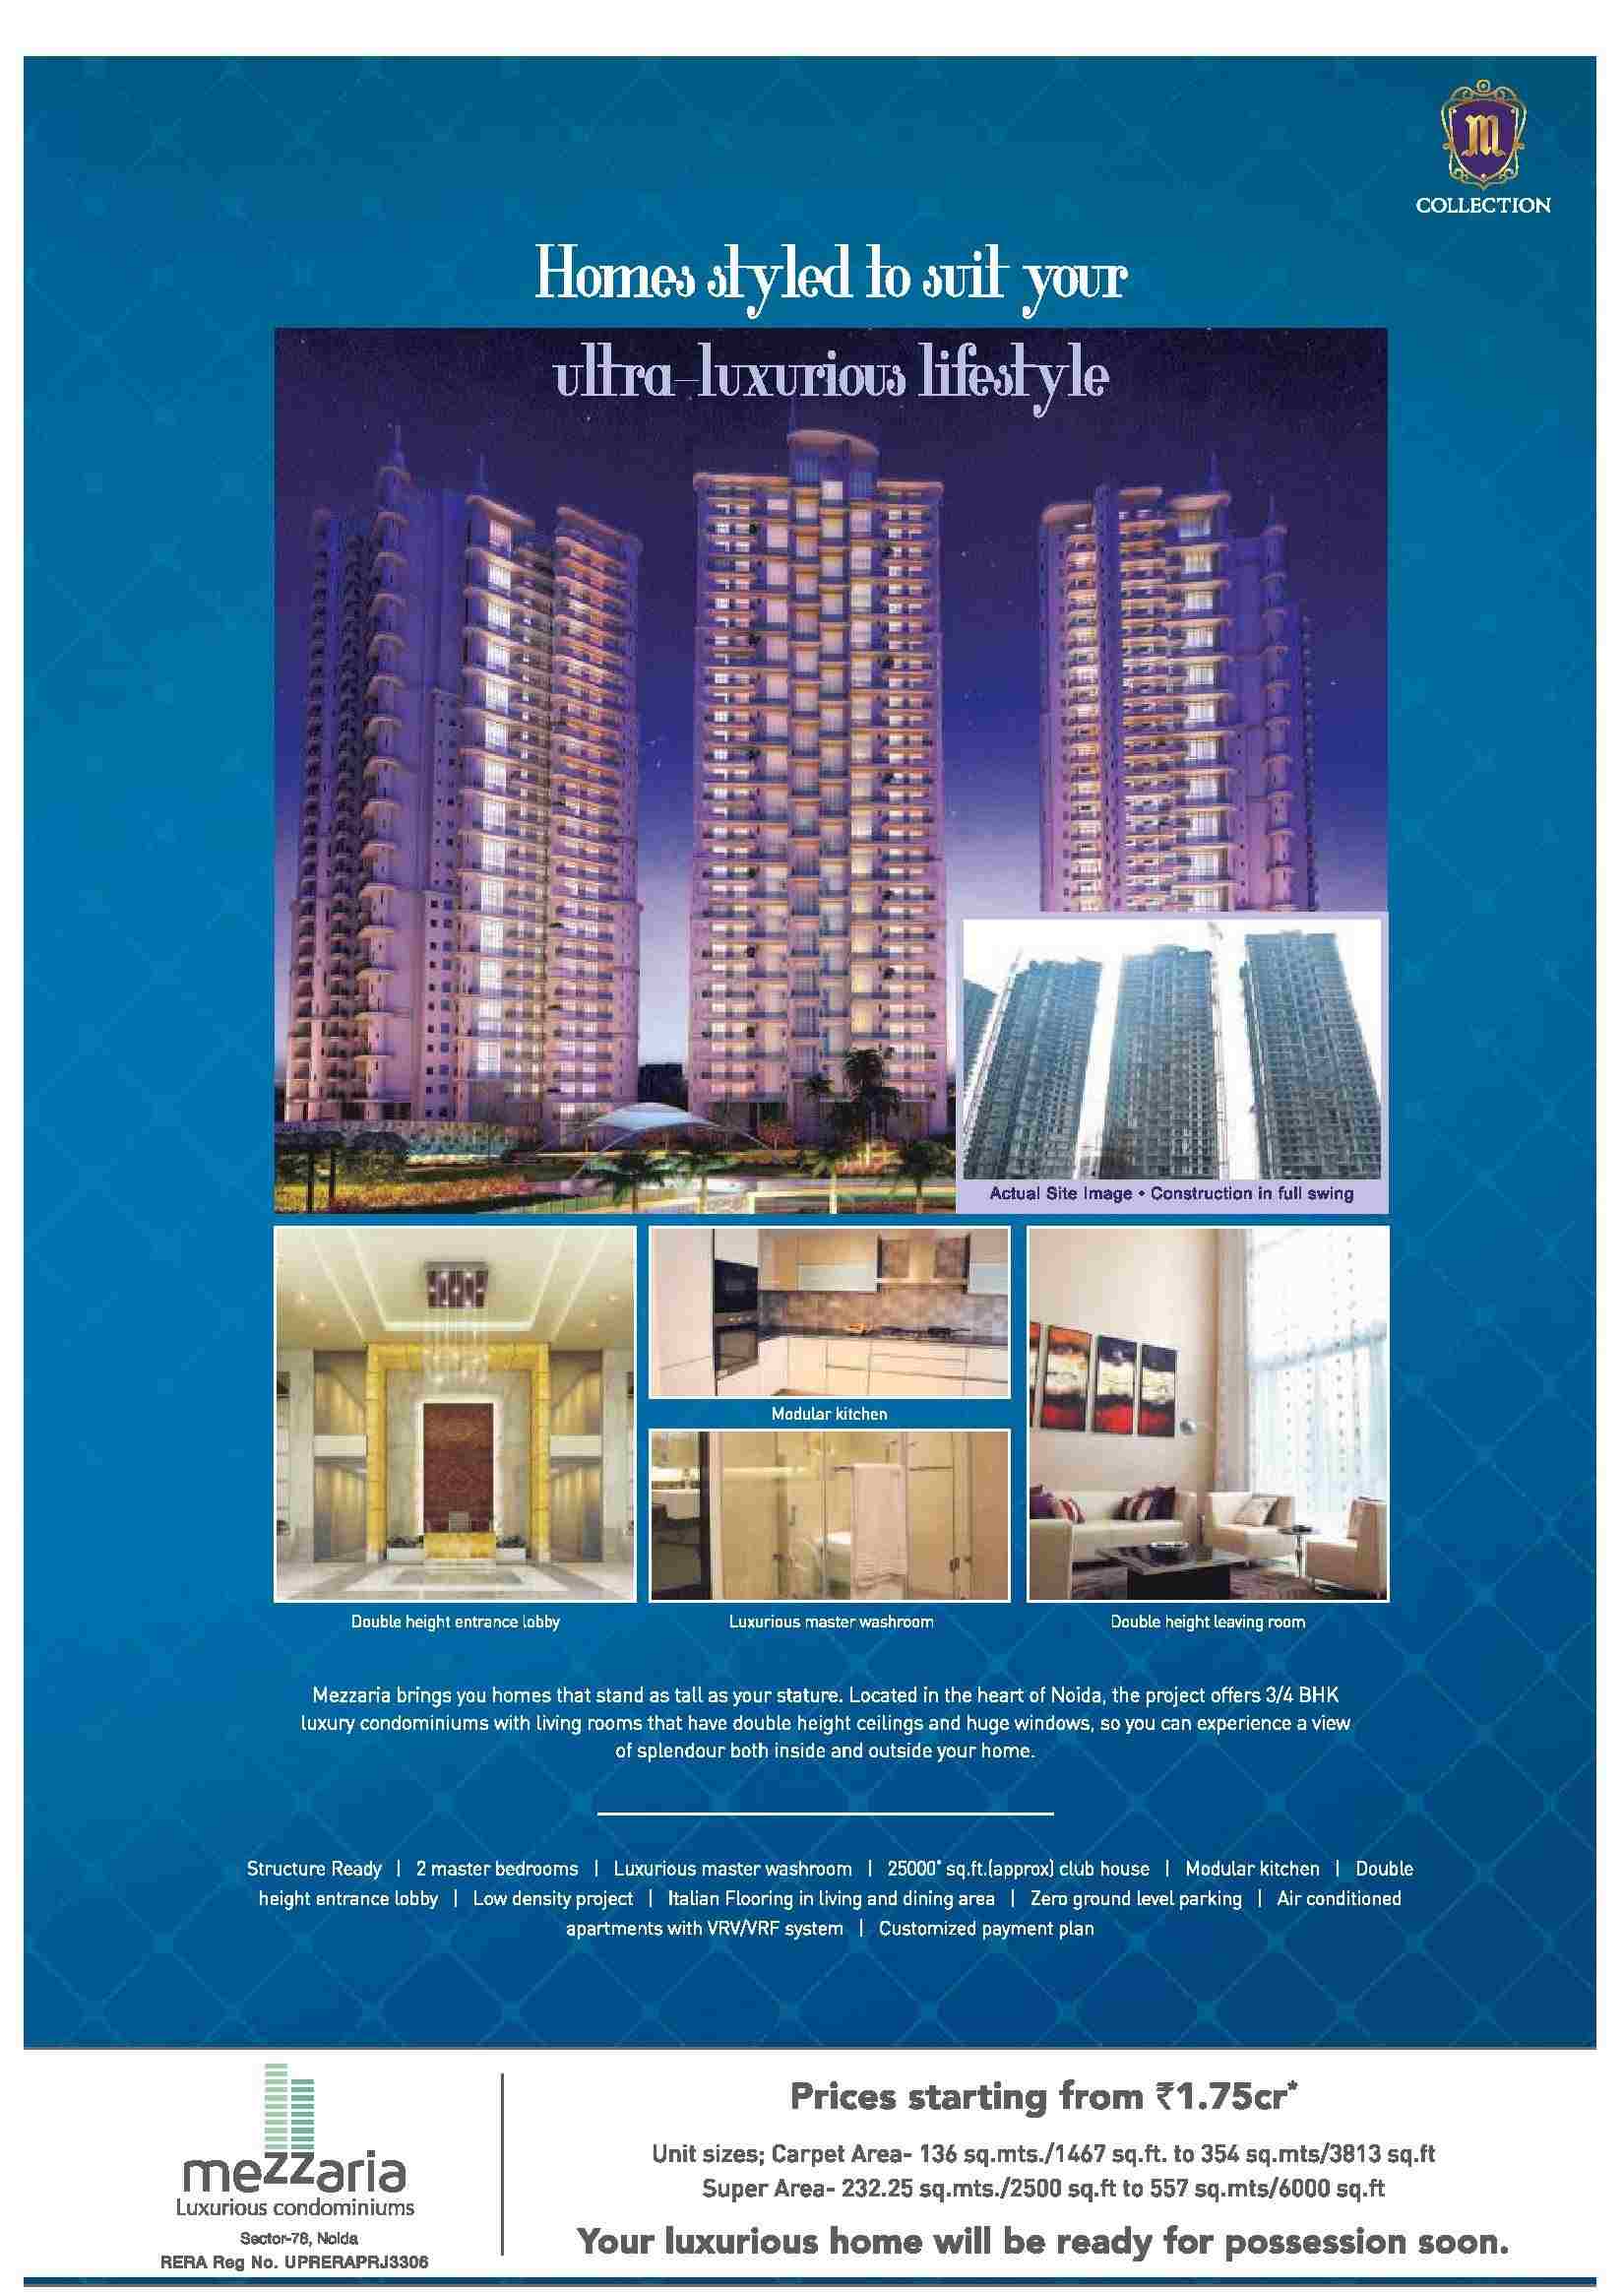 Reside in homes styled to suit your luxurious lifestyle at Mahagun Mezzaria in Noida Update